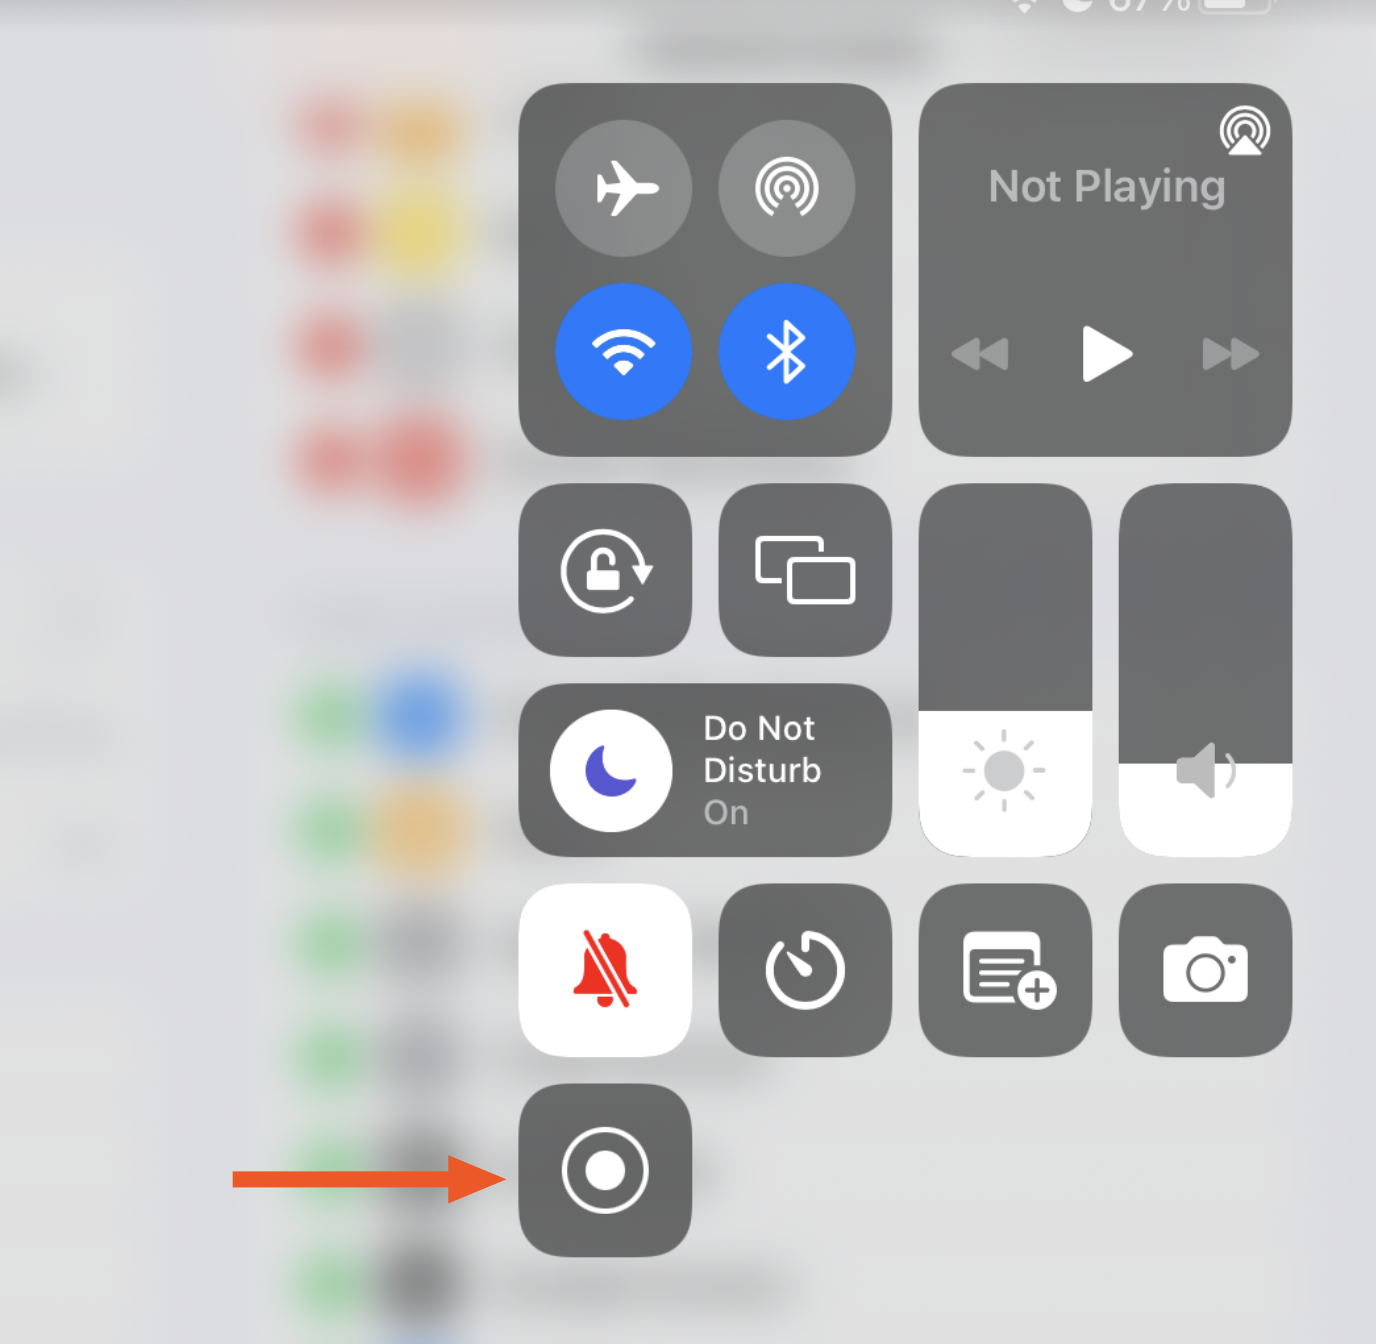 The record button on iPad